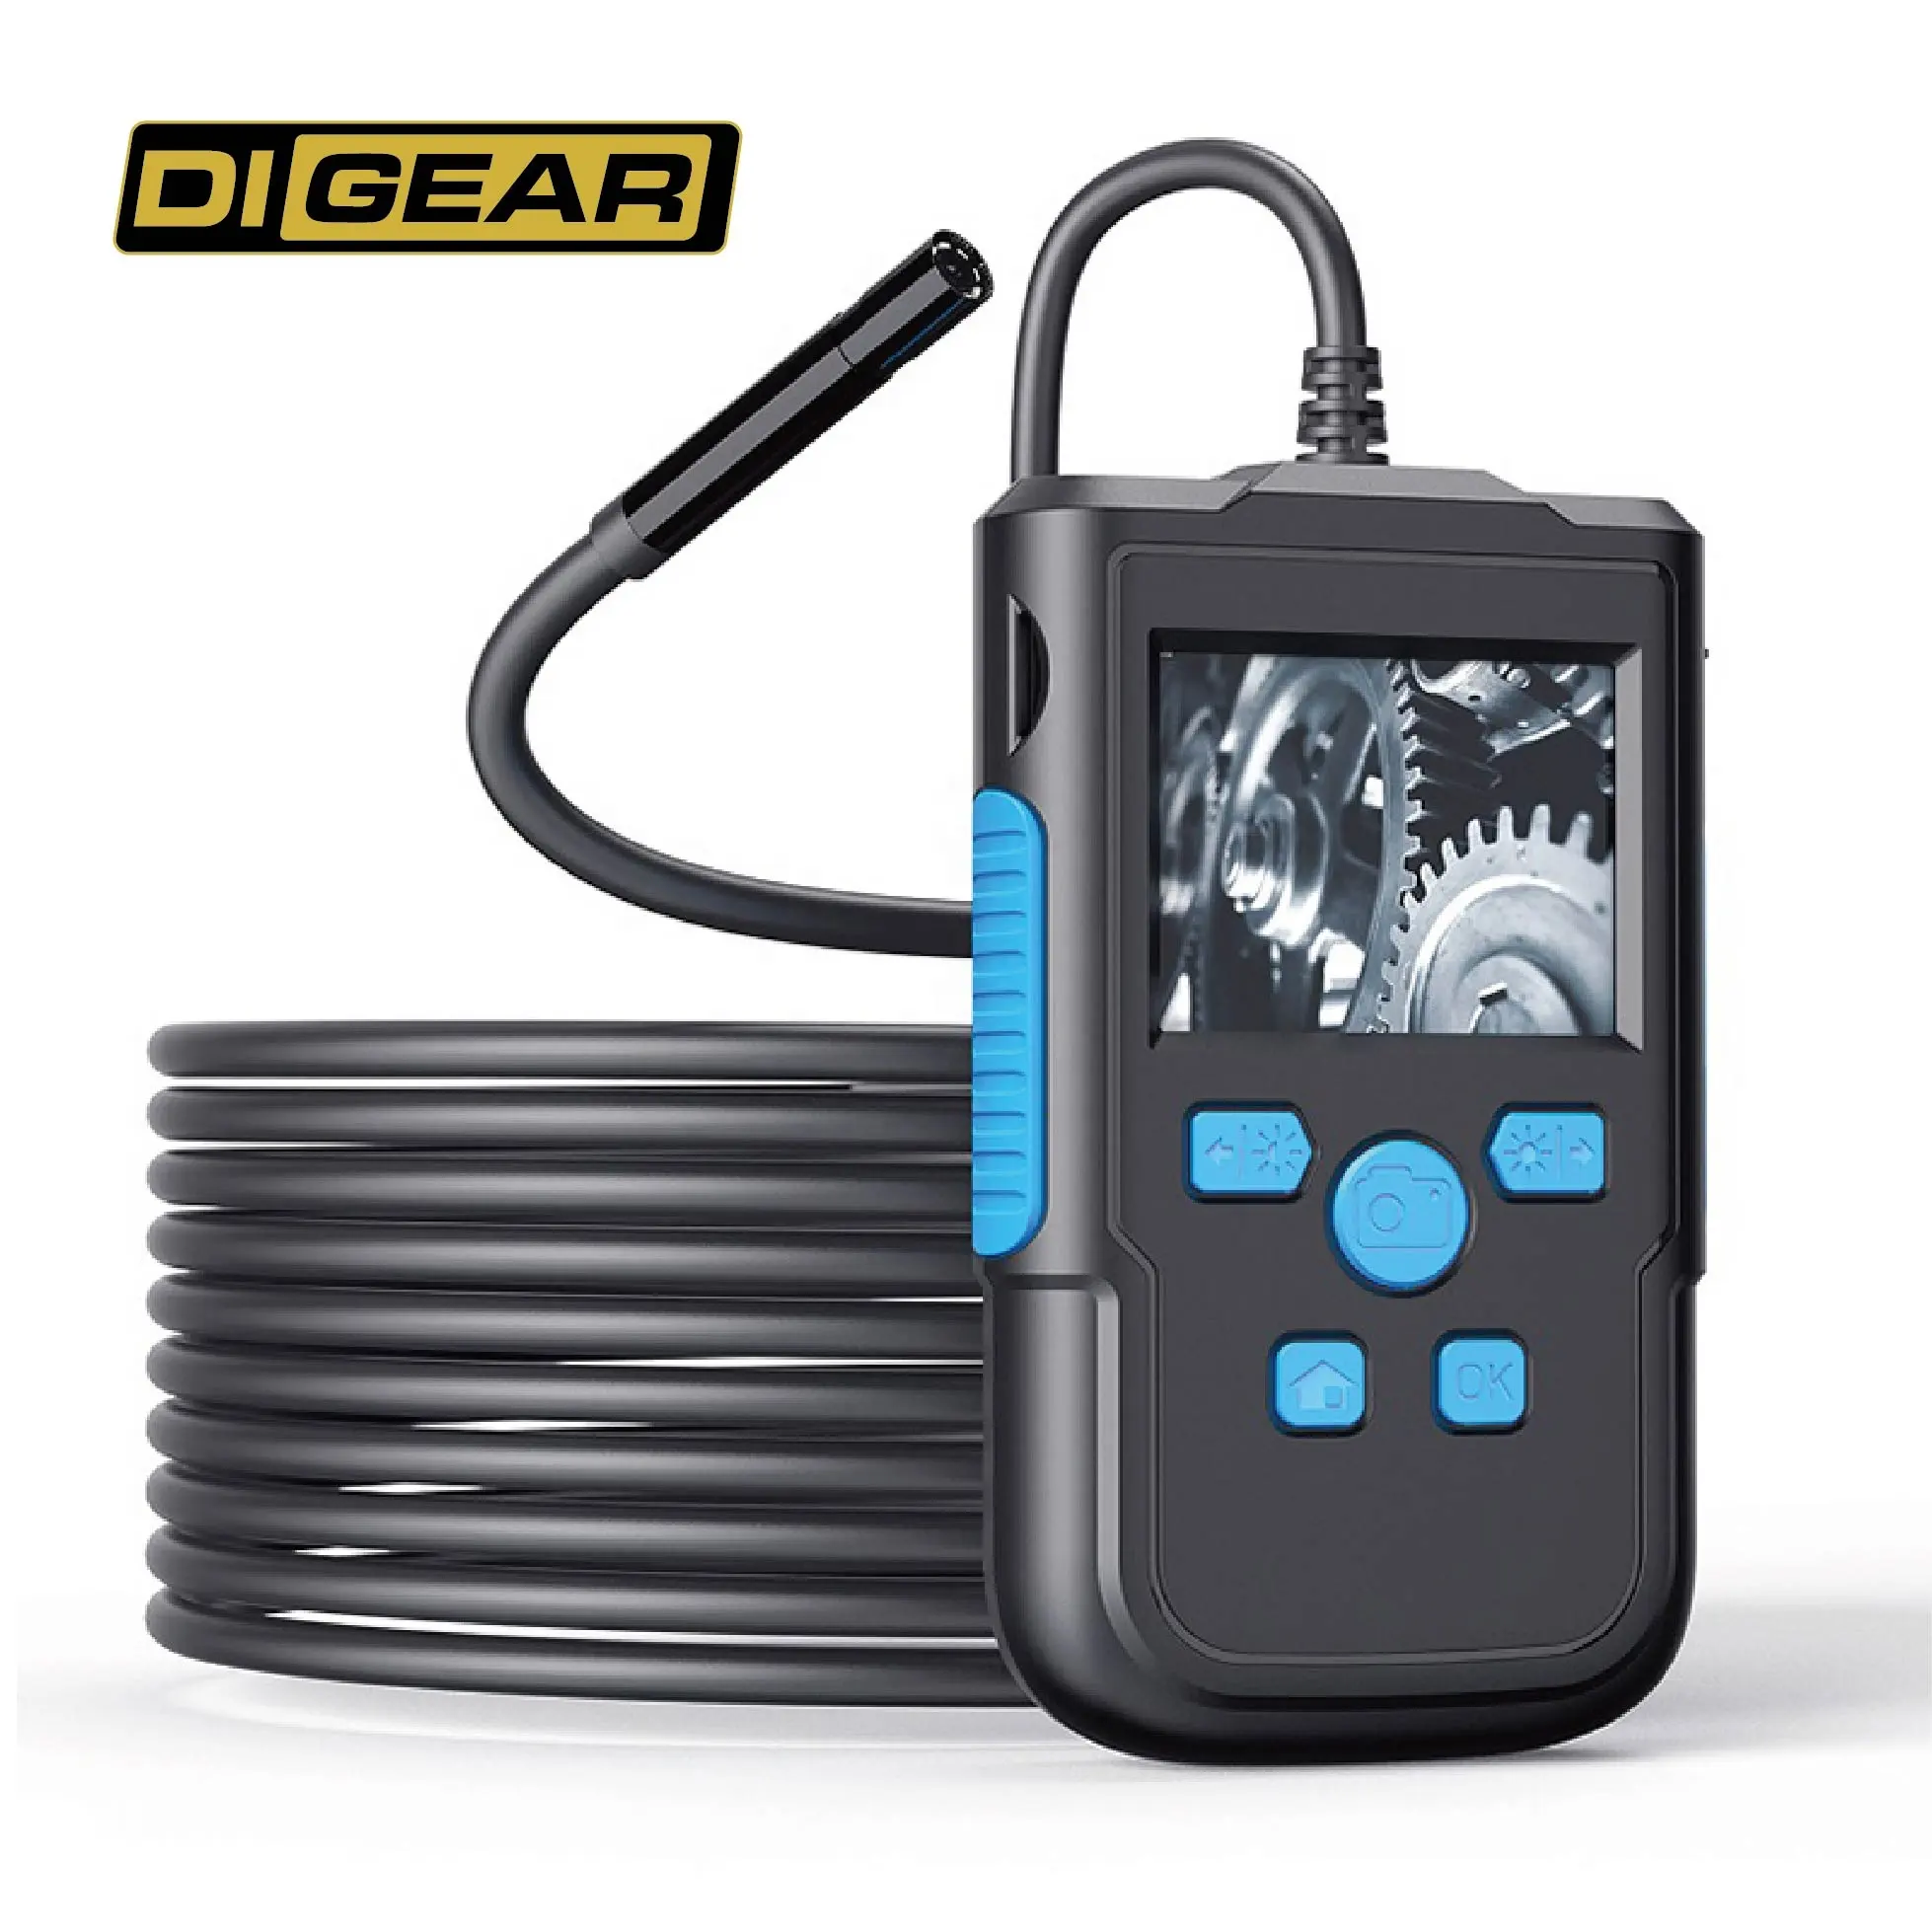 DiGear New 2.4-inch color LCD display with long working time hard Cable 8mm lens Industrial P60 Endoscope Camera